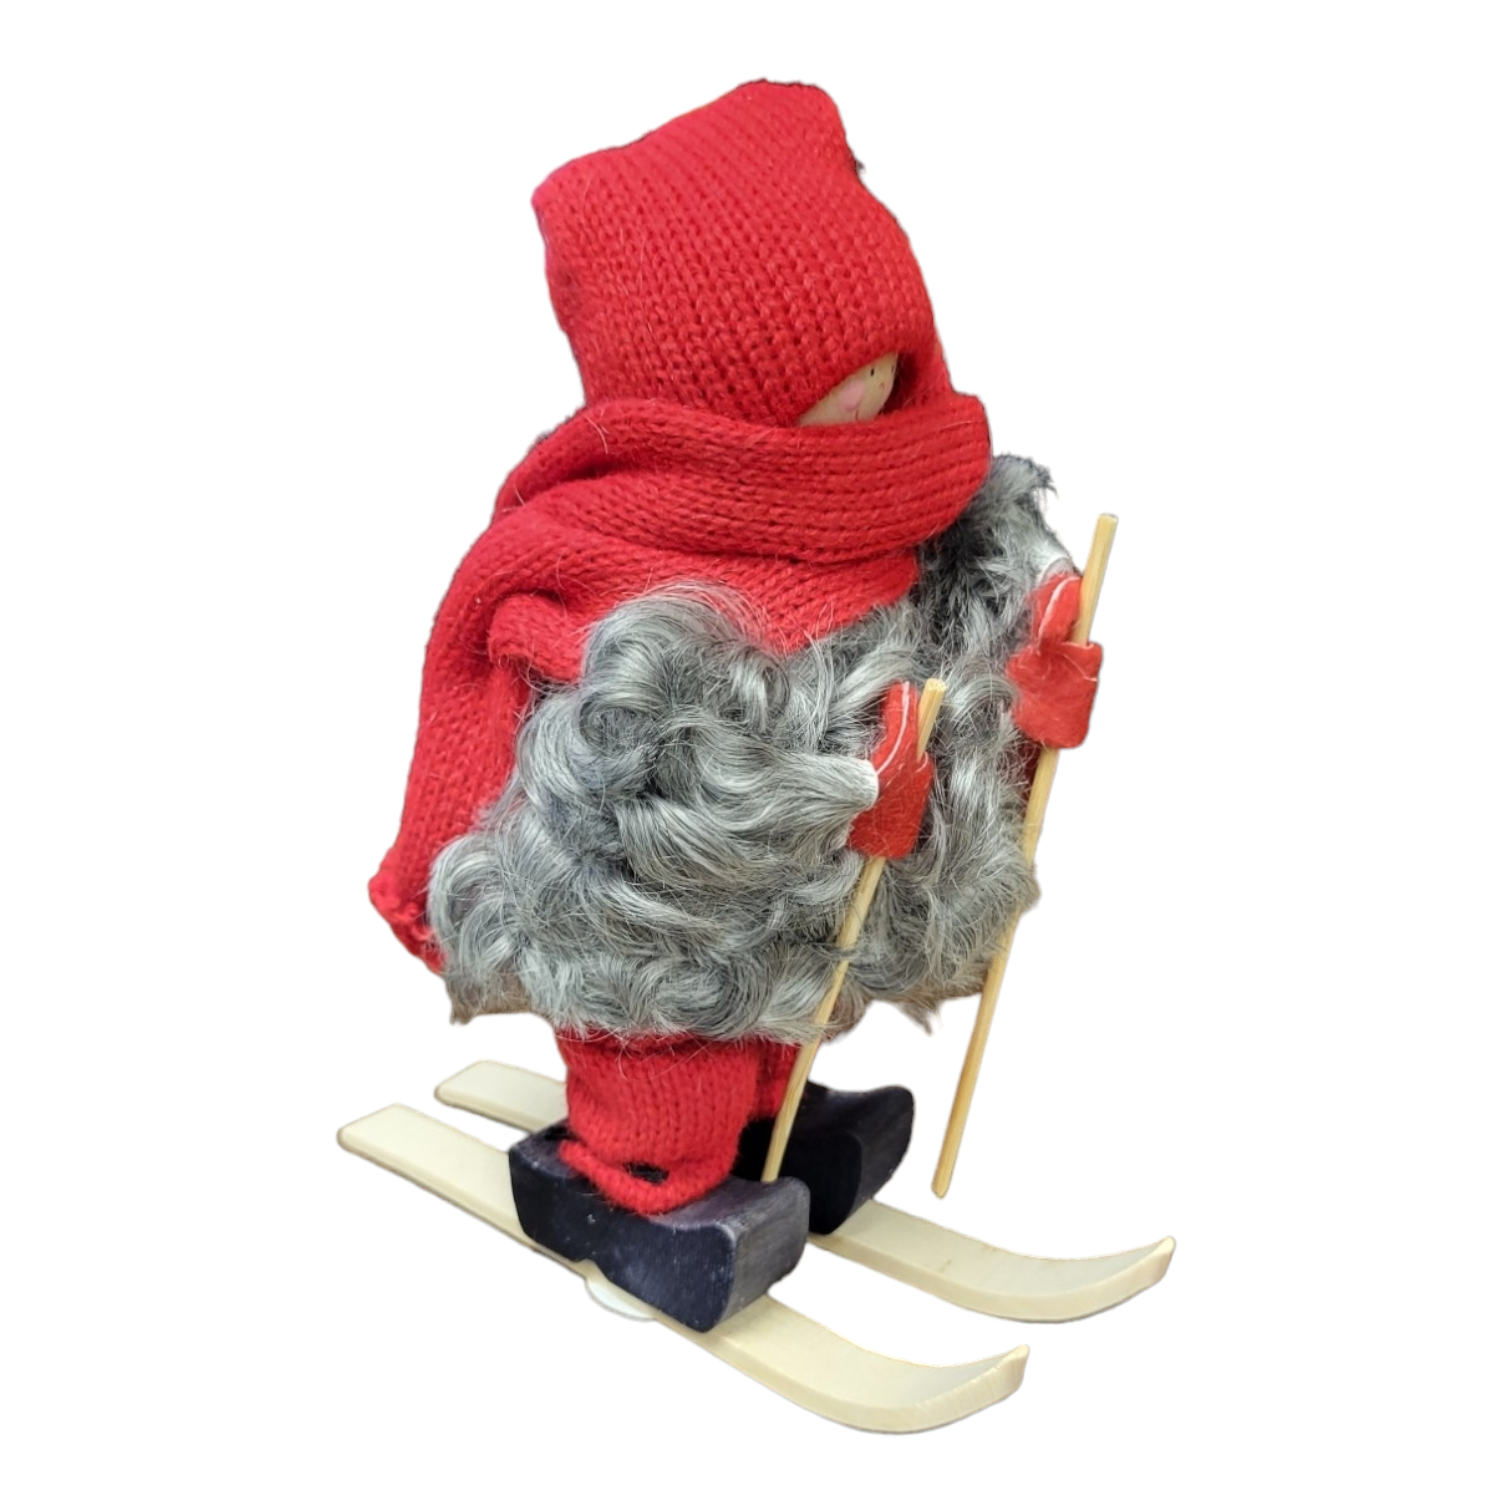 Figurine: Tomte on Skis, Red